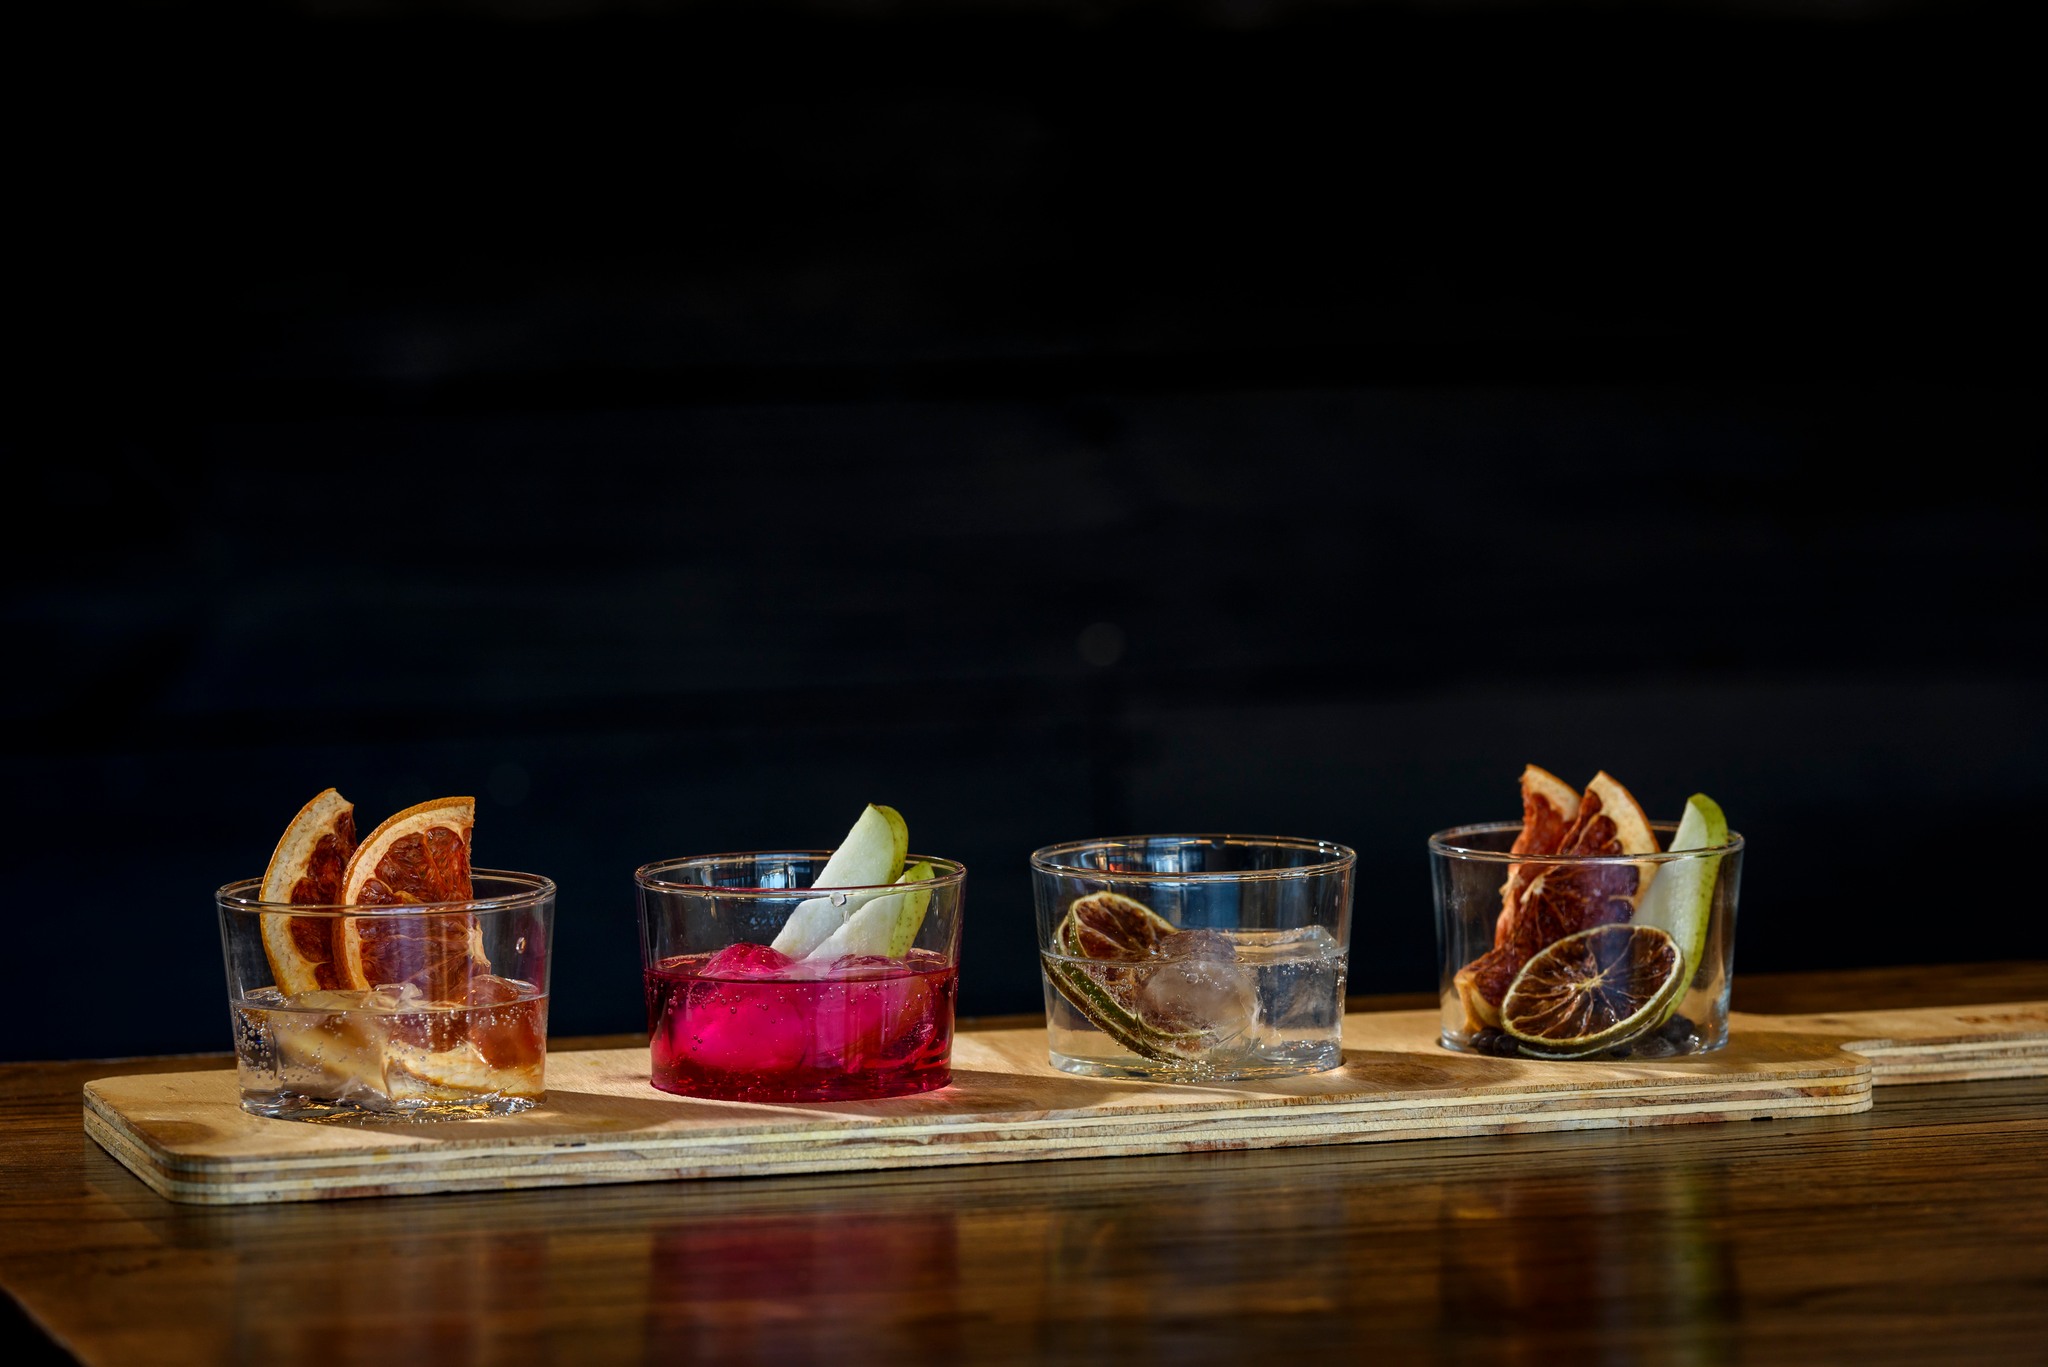 WIN a Gin Experience for 2 People at Prohibition Gin!